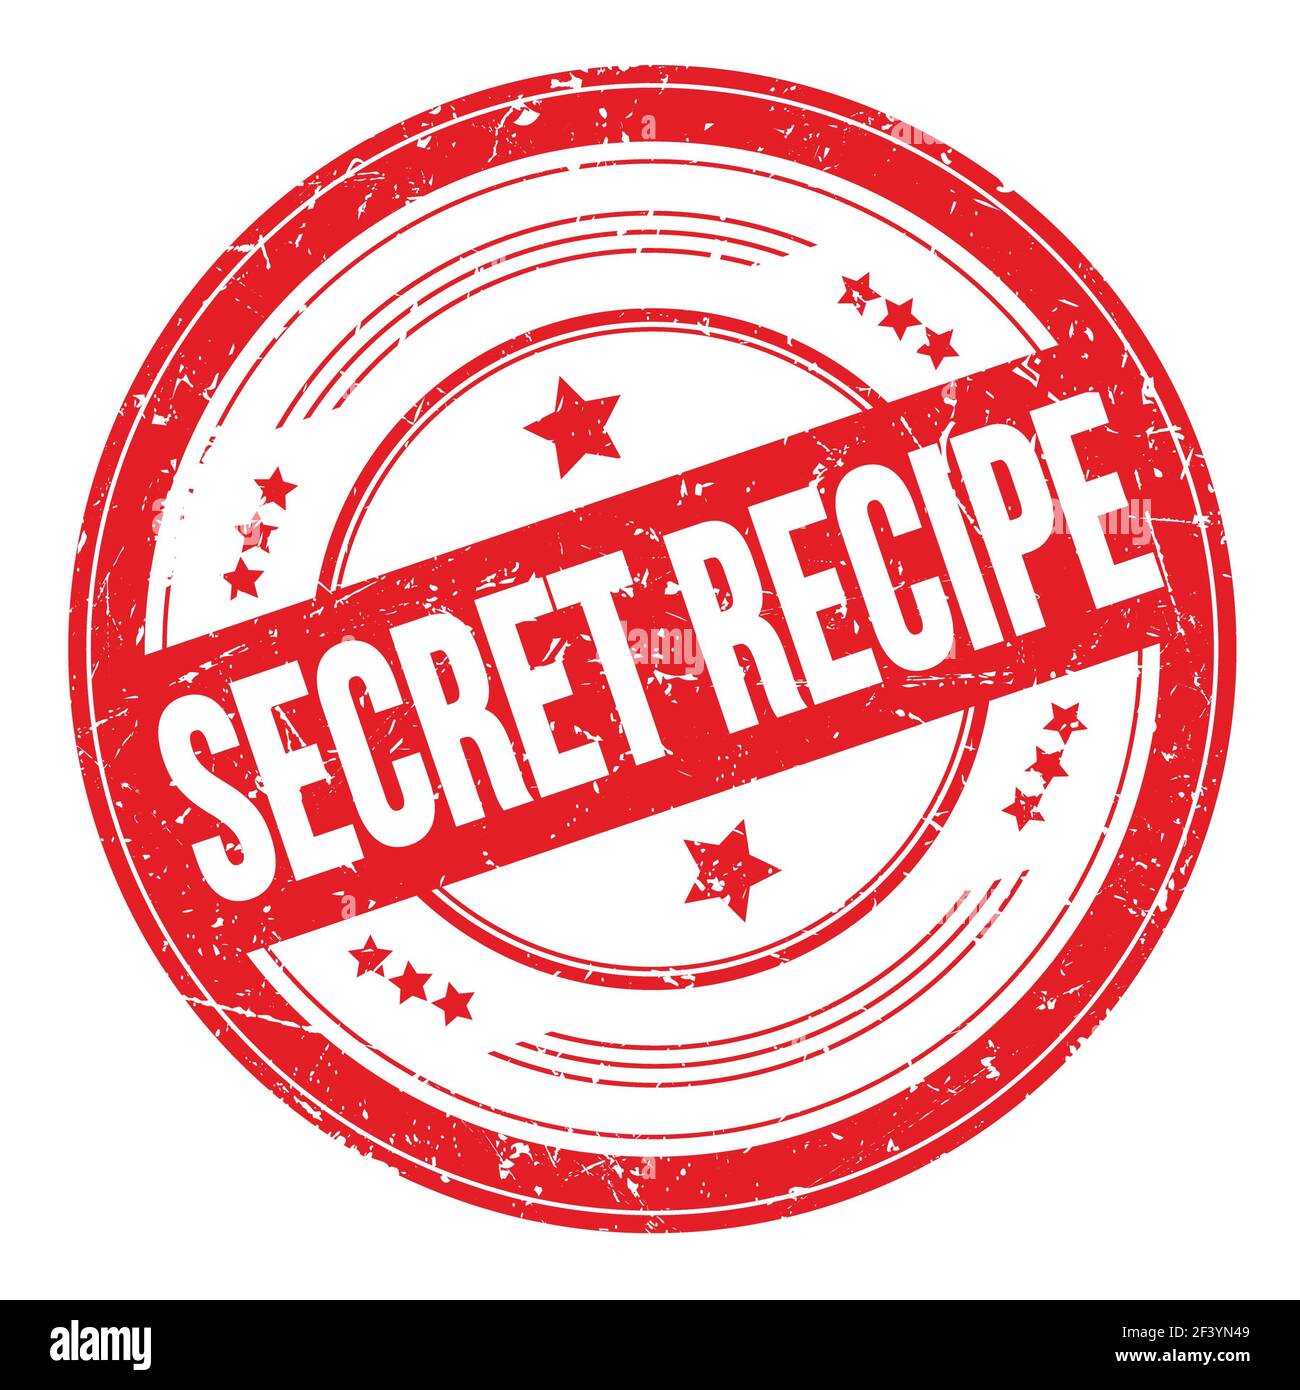 SECRET RECIPE text on red round grungy texture stamp Stock Photo